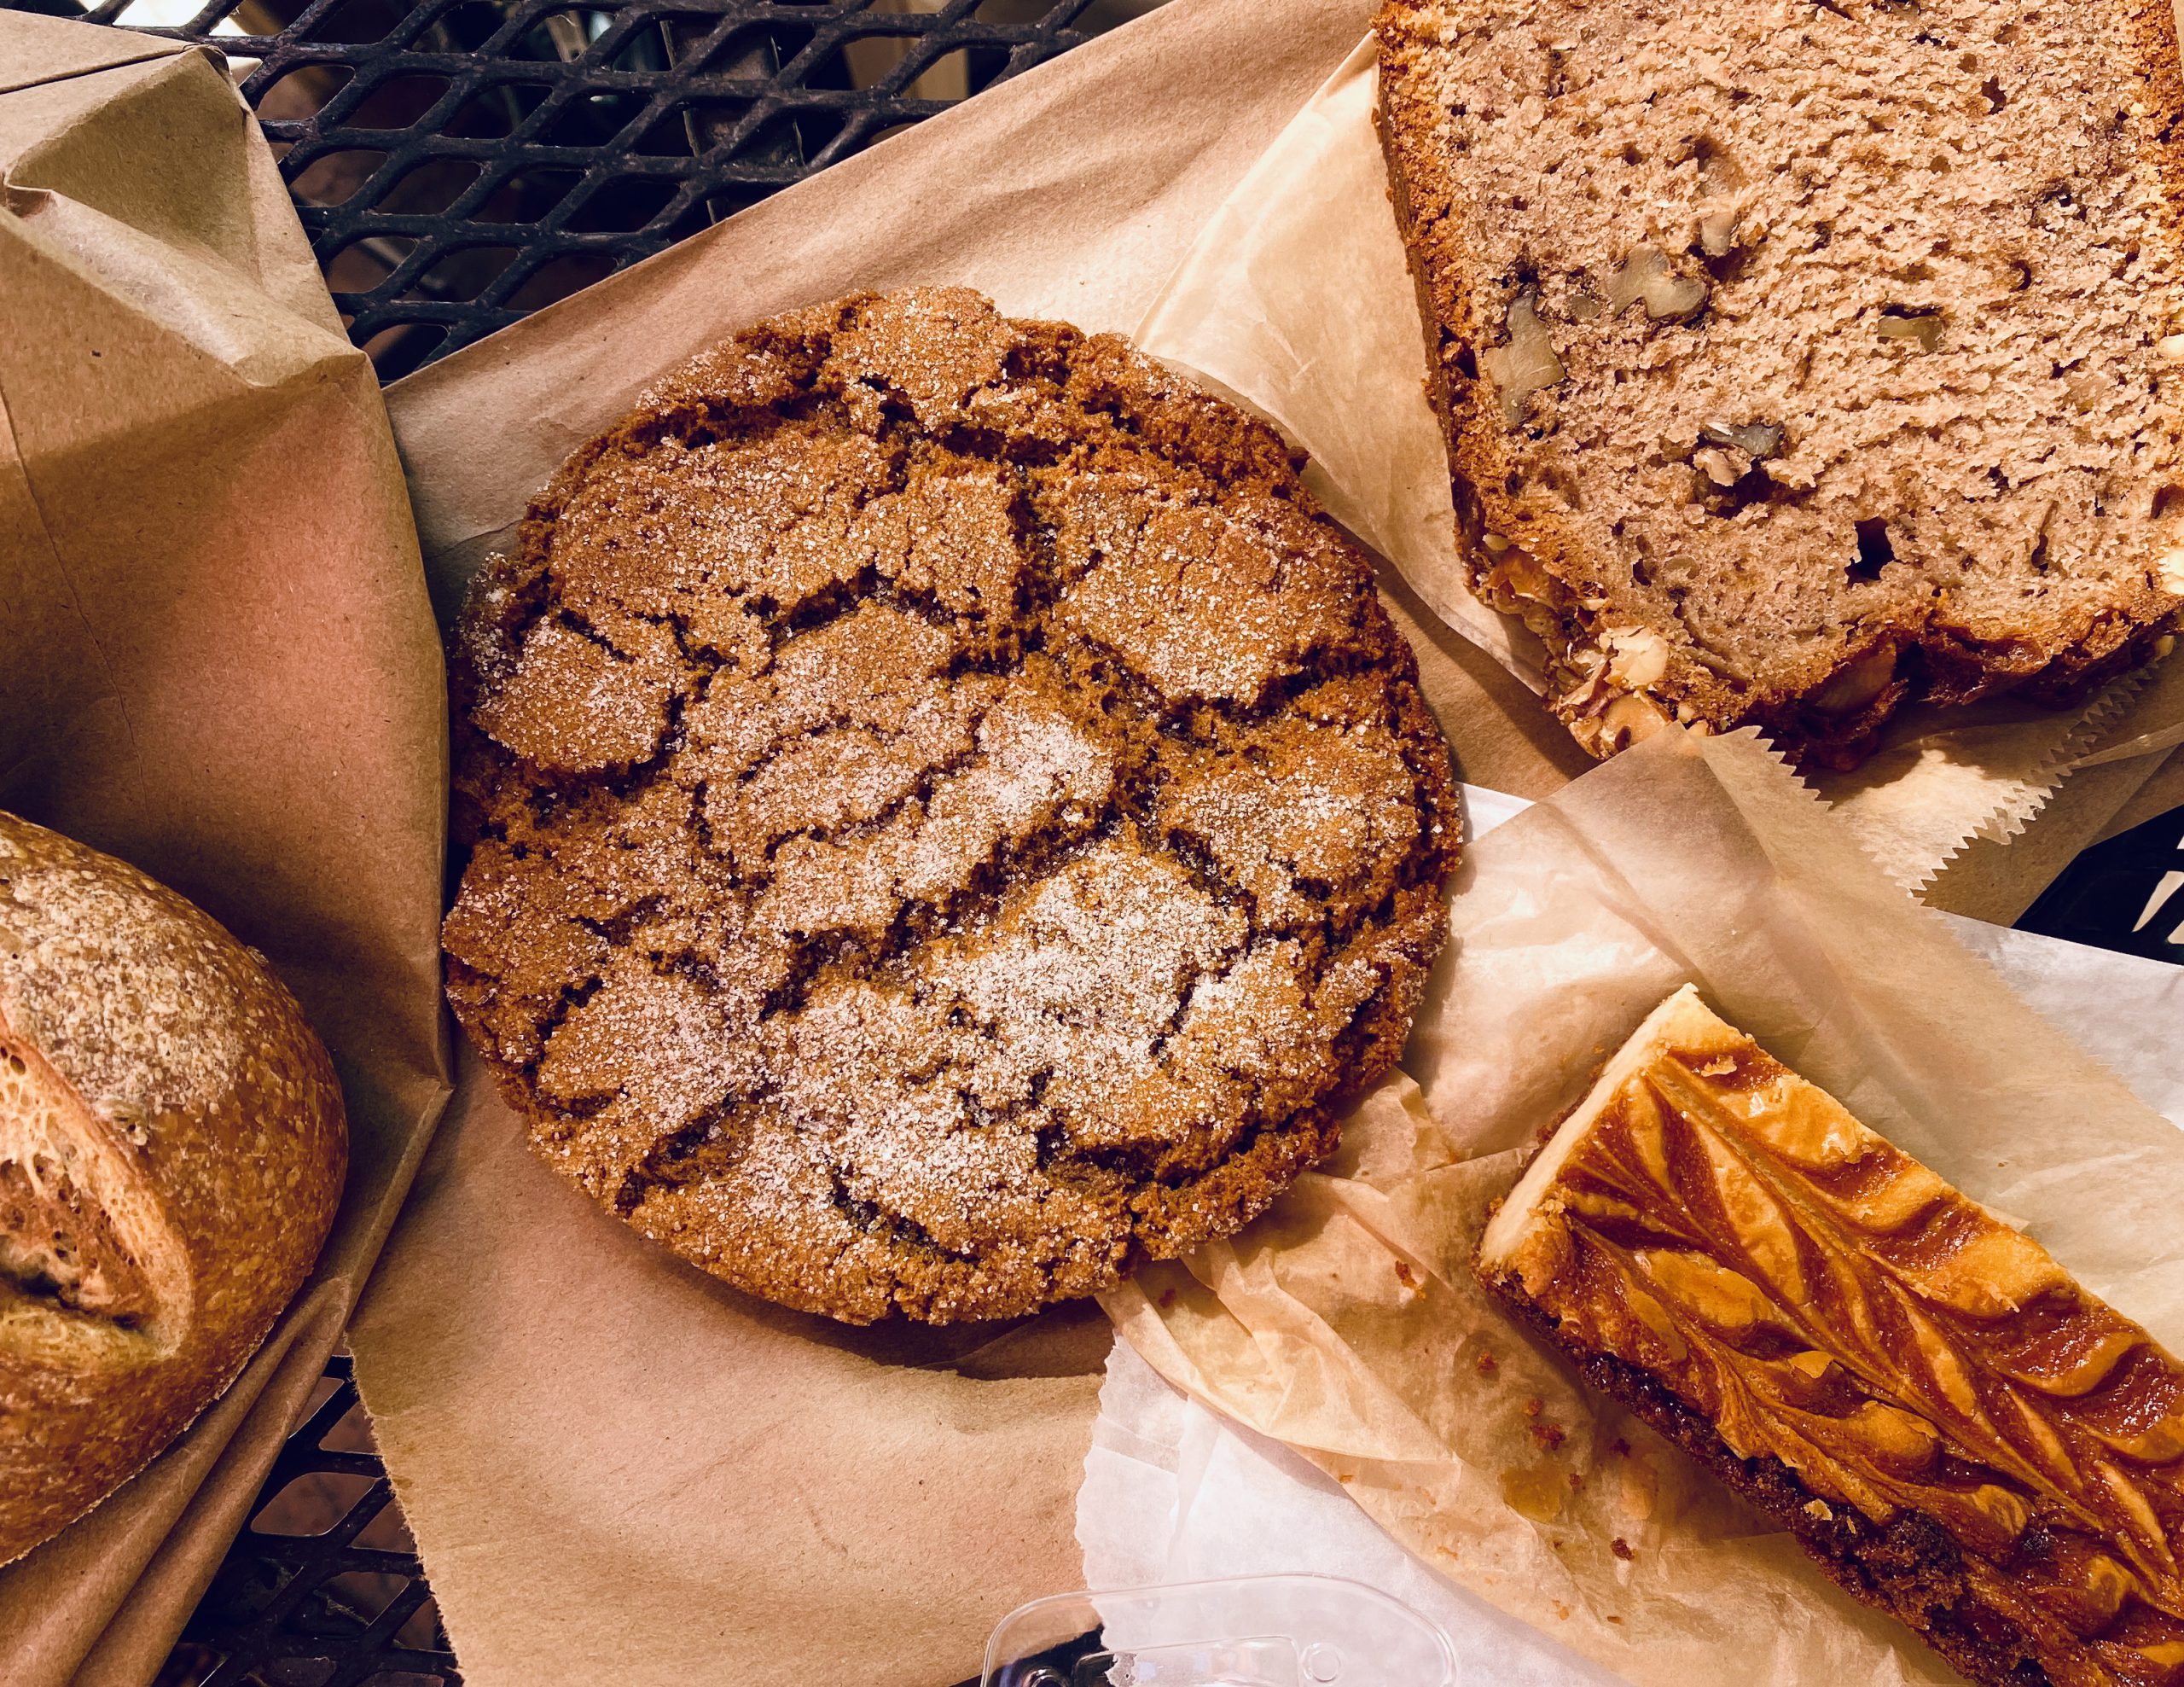 A molasses cookie and baked treats from CERES